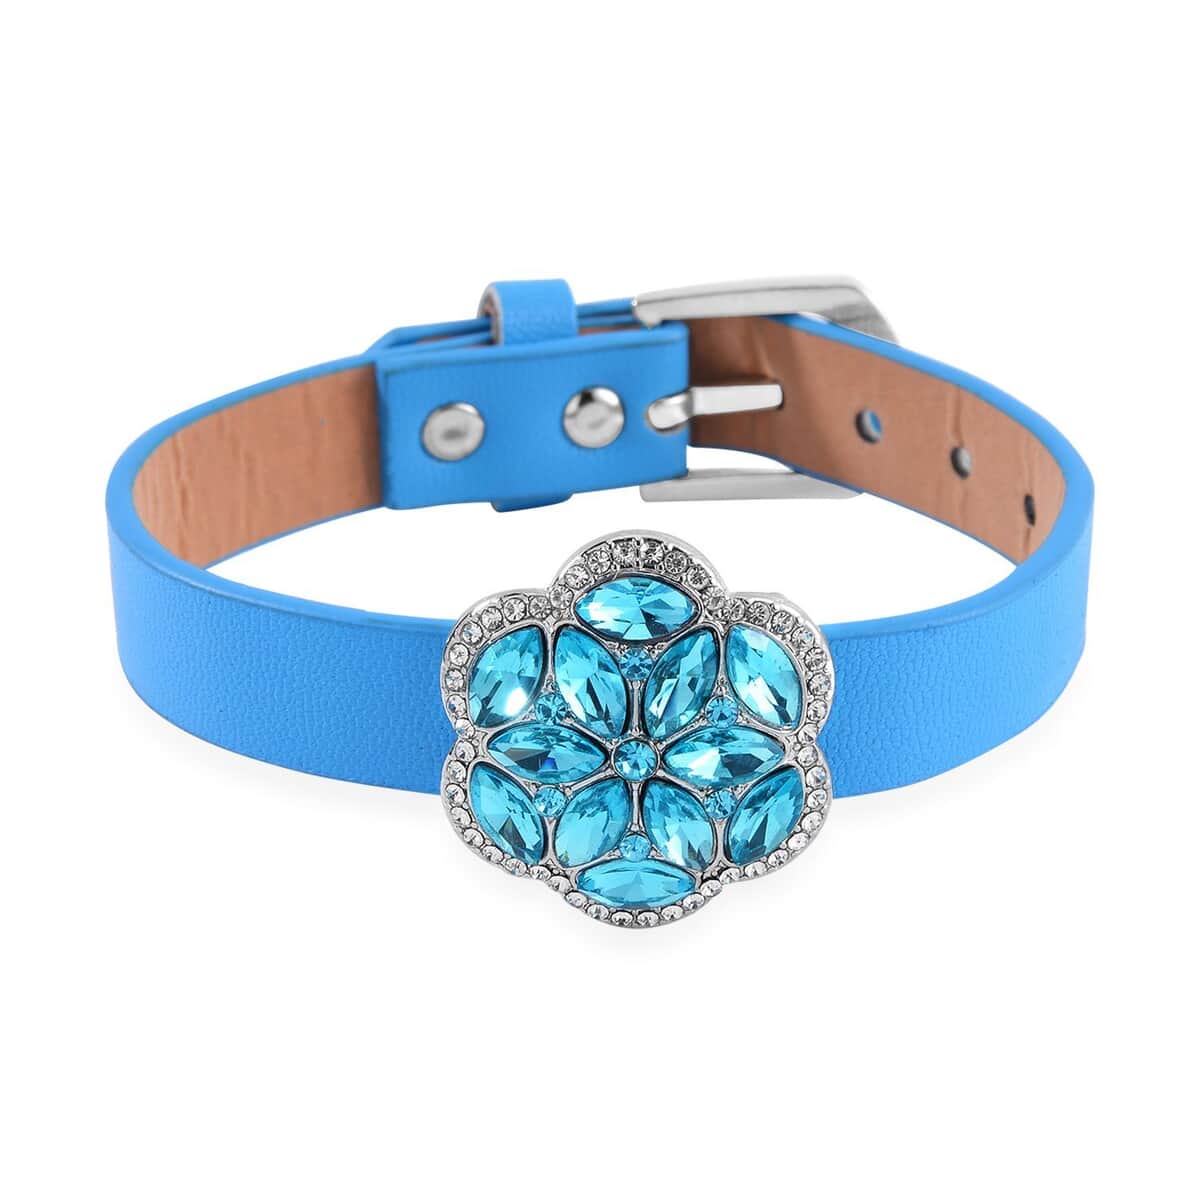 Sky Blue Color and White Austrian Crystal, Faux Leather Floral Bracelet (6-8In), Earrings, Ring (Size 7.0) and Pendant Necklace 20-22 Inches In Silvertone image number 3